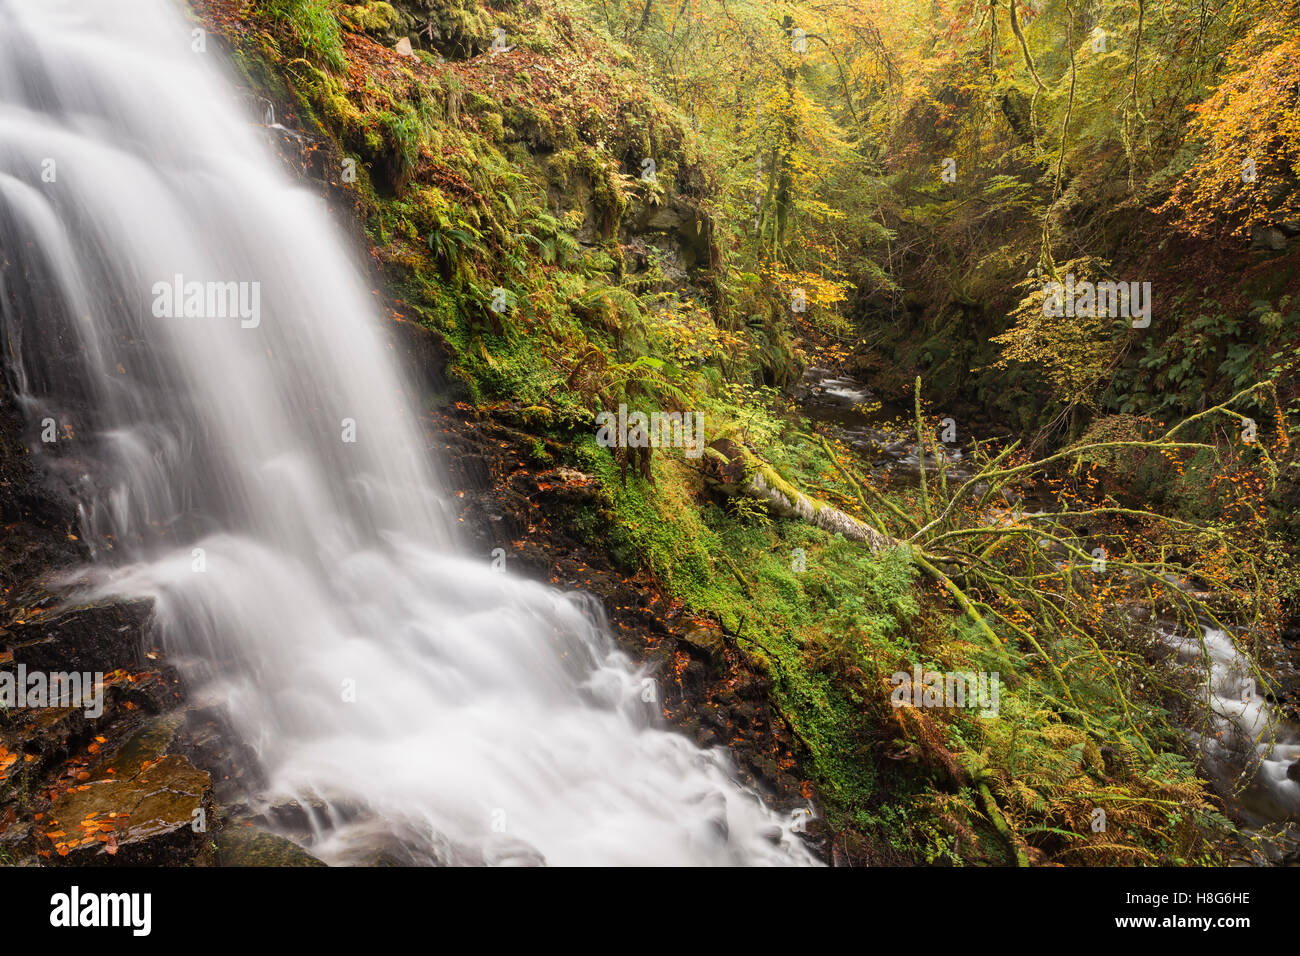 A Waterfall runs down rocks at The Birks of Aberfeldy along the Moness Burn in Perthshire, Scotland in Autumn. Stock Photo